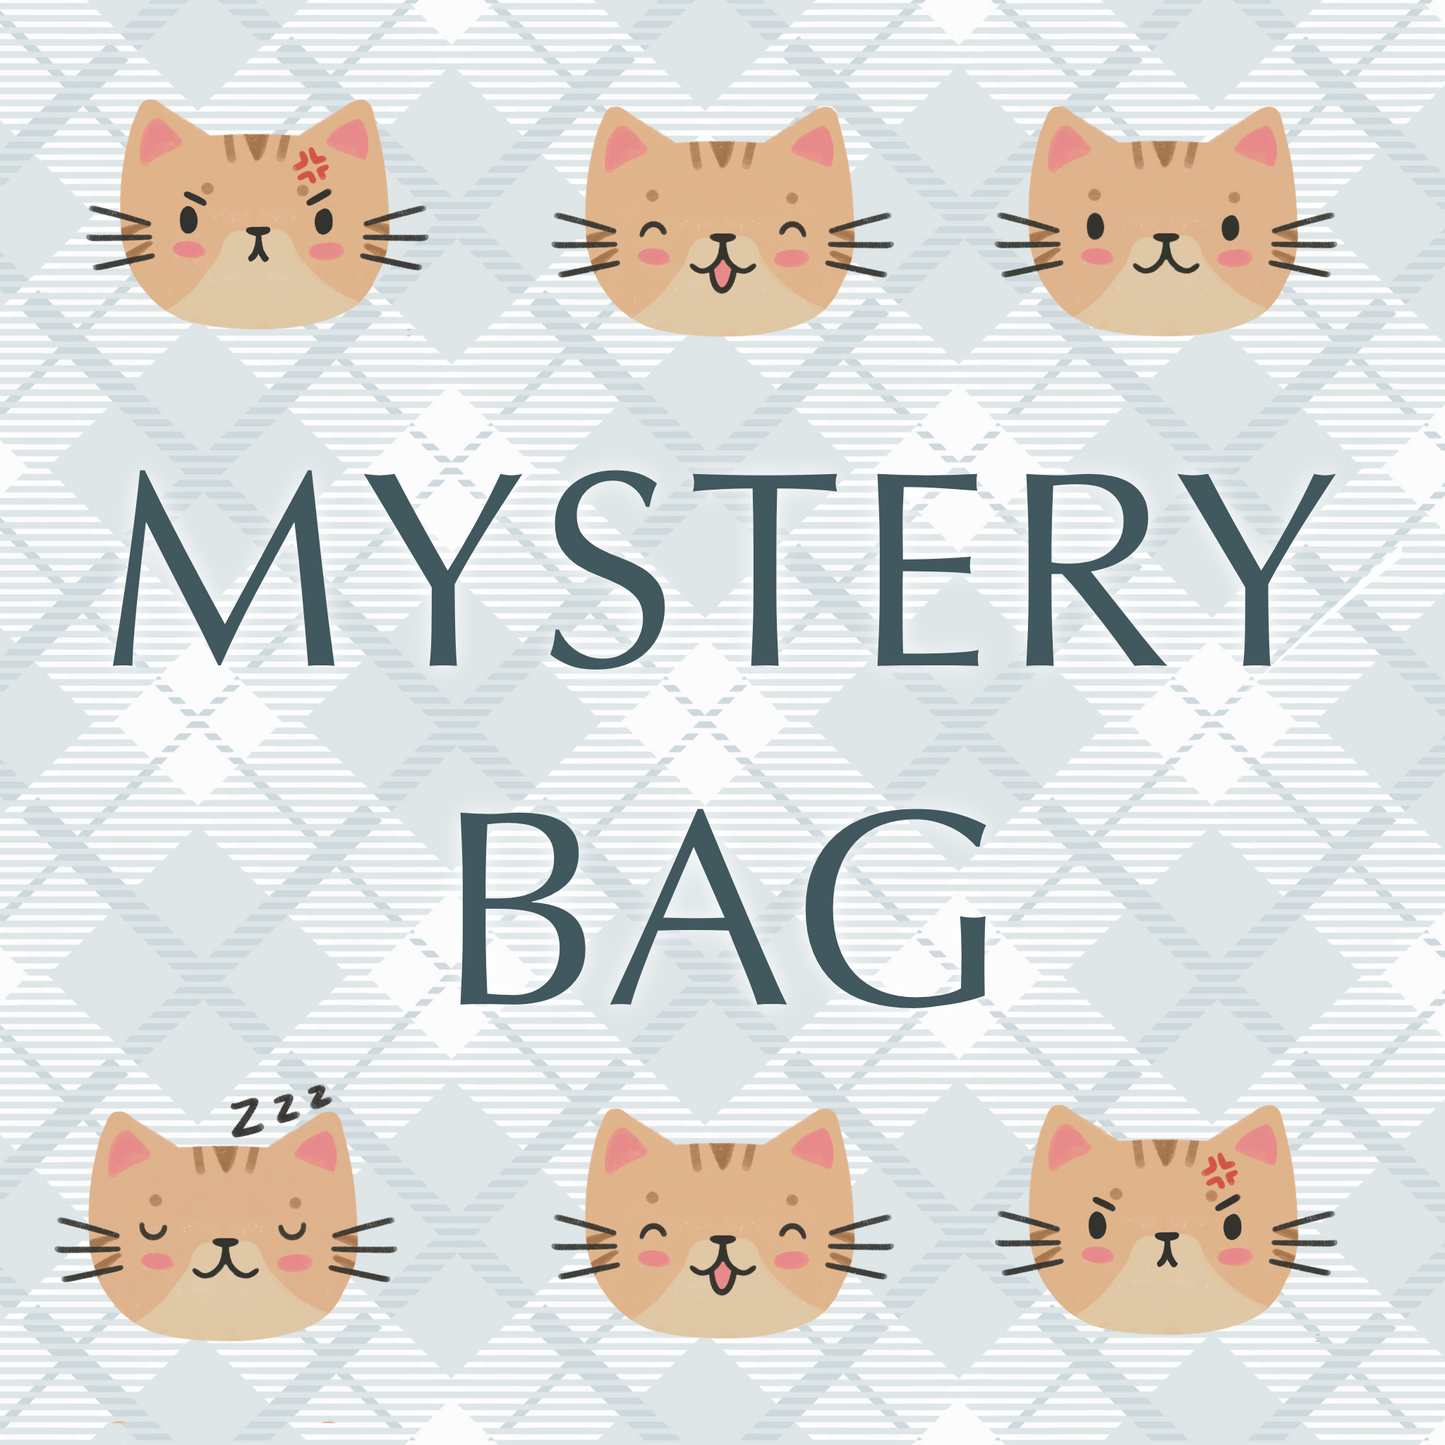 DIE CUT MYSTERY GRAB BAG (A GRADE PRODUCTS, NO DUPLICATES)